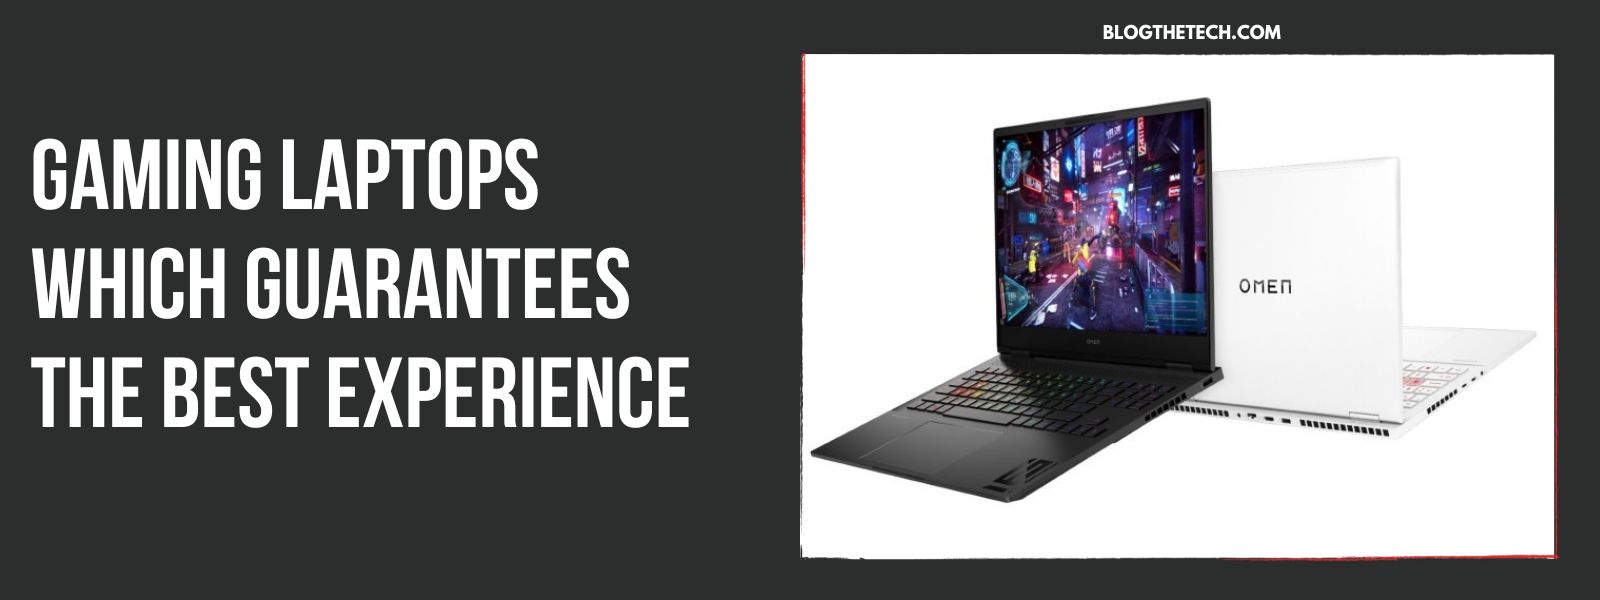 Gaming Laptops Which Guarantees the Best Experience